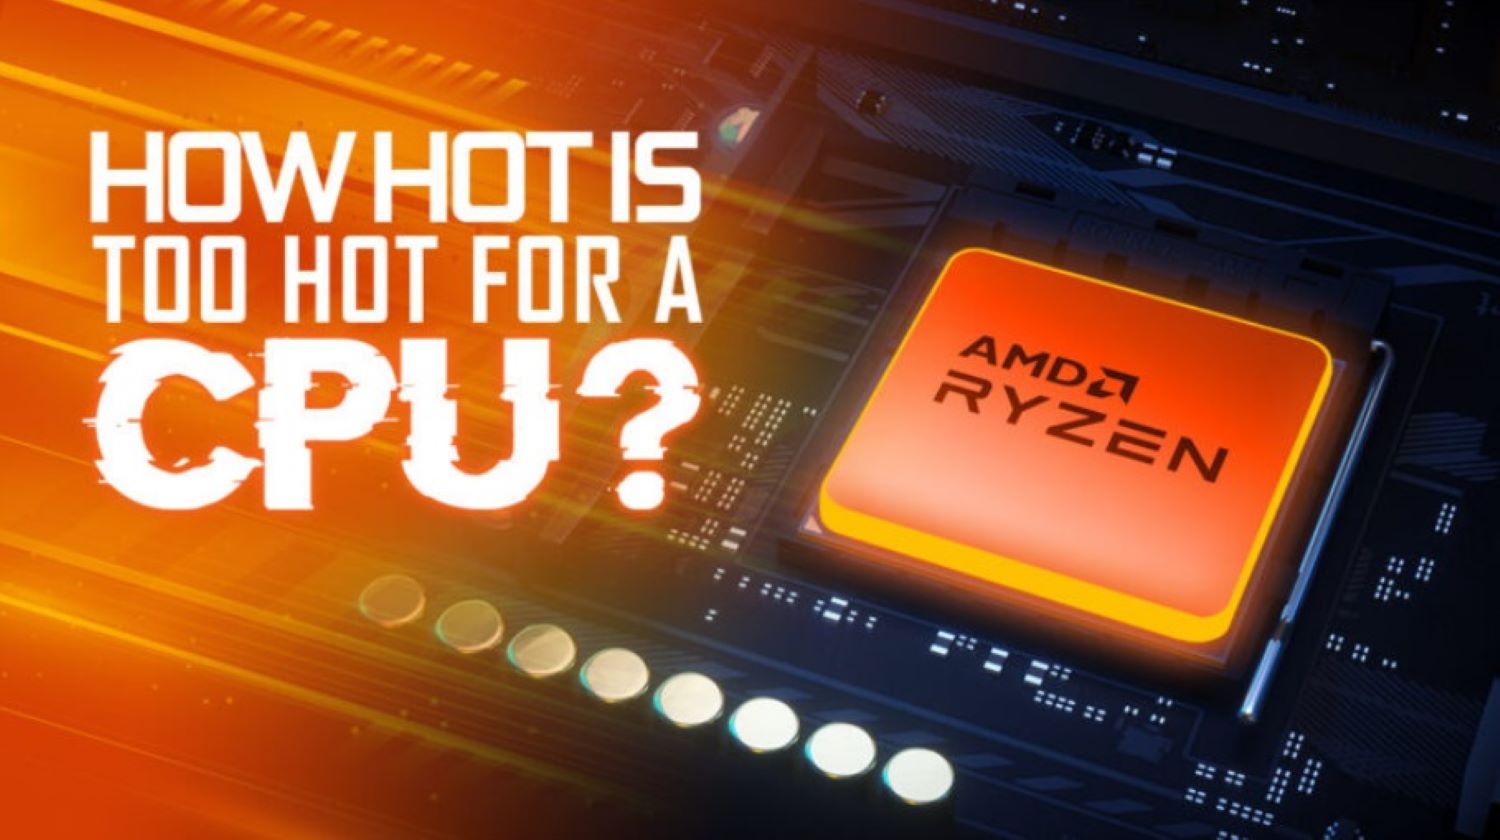 how hot is too hot for a cpu